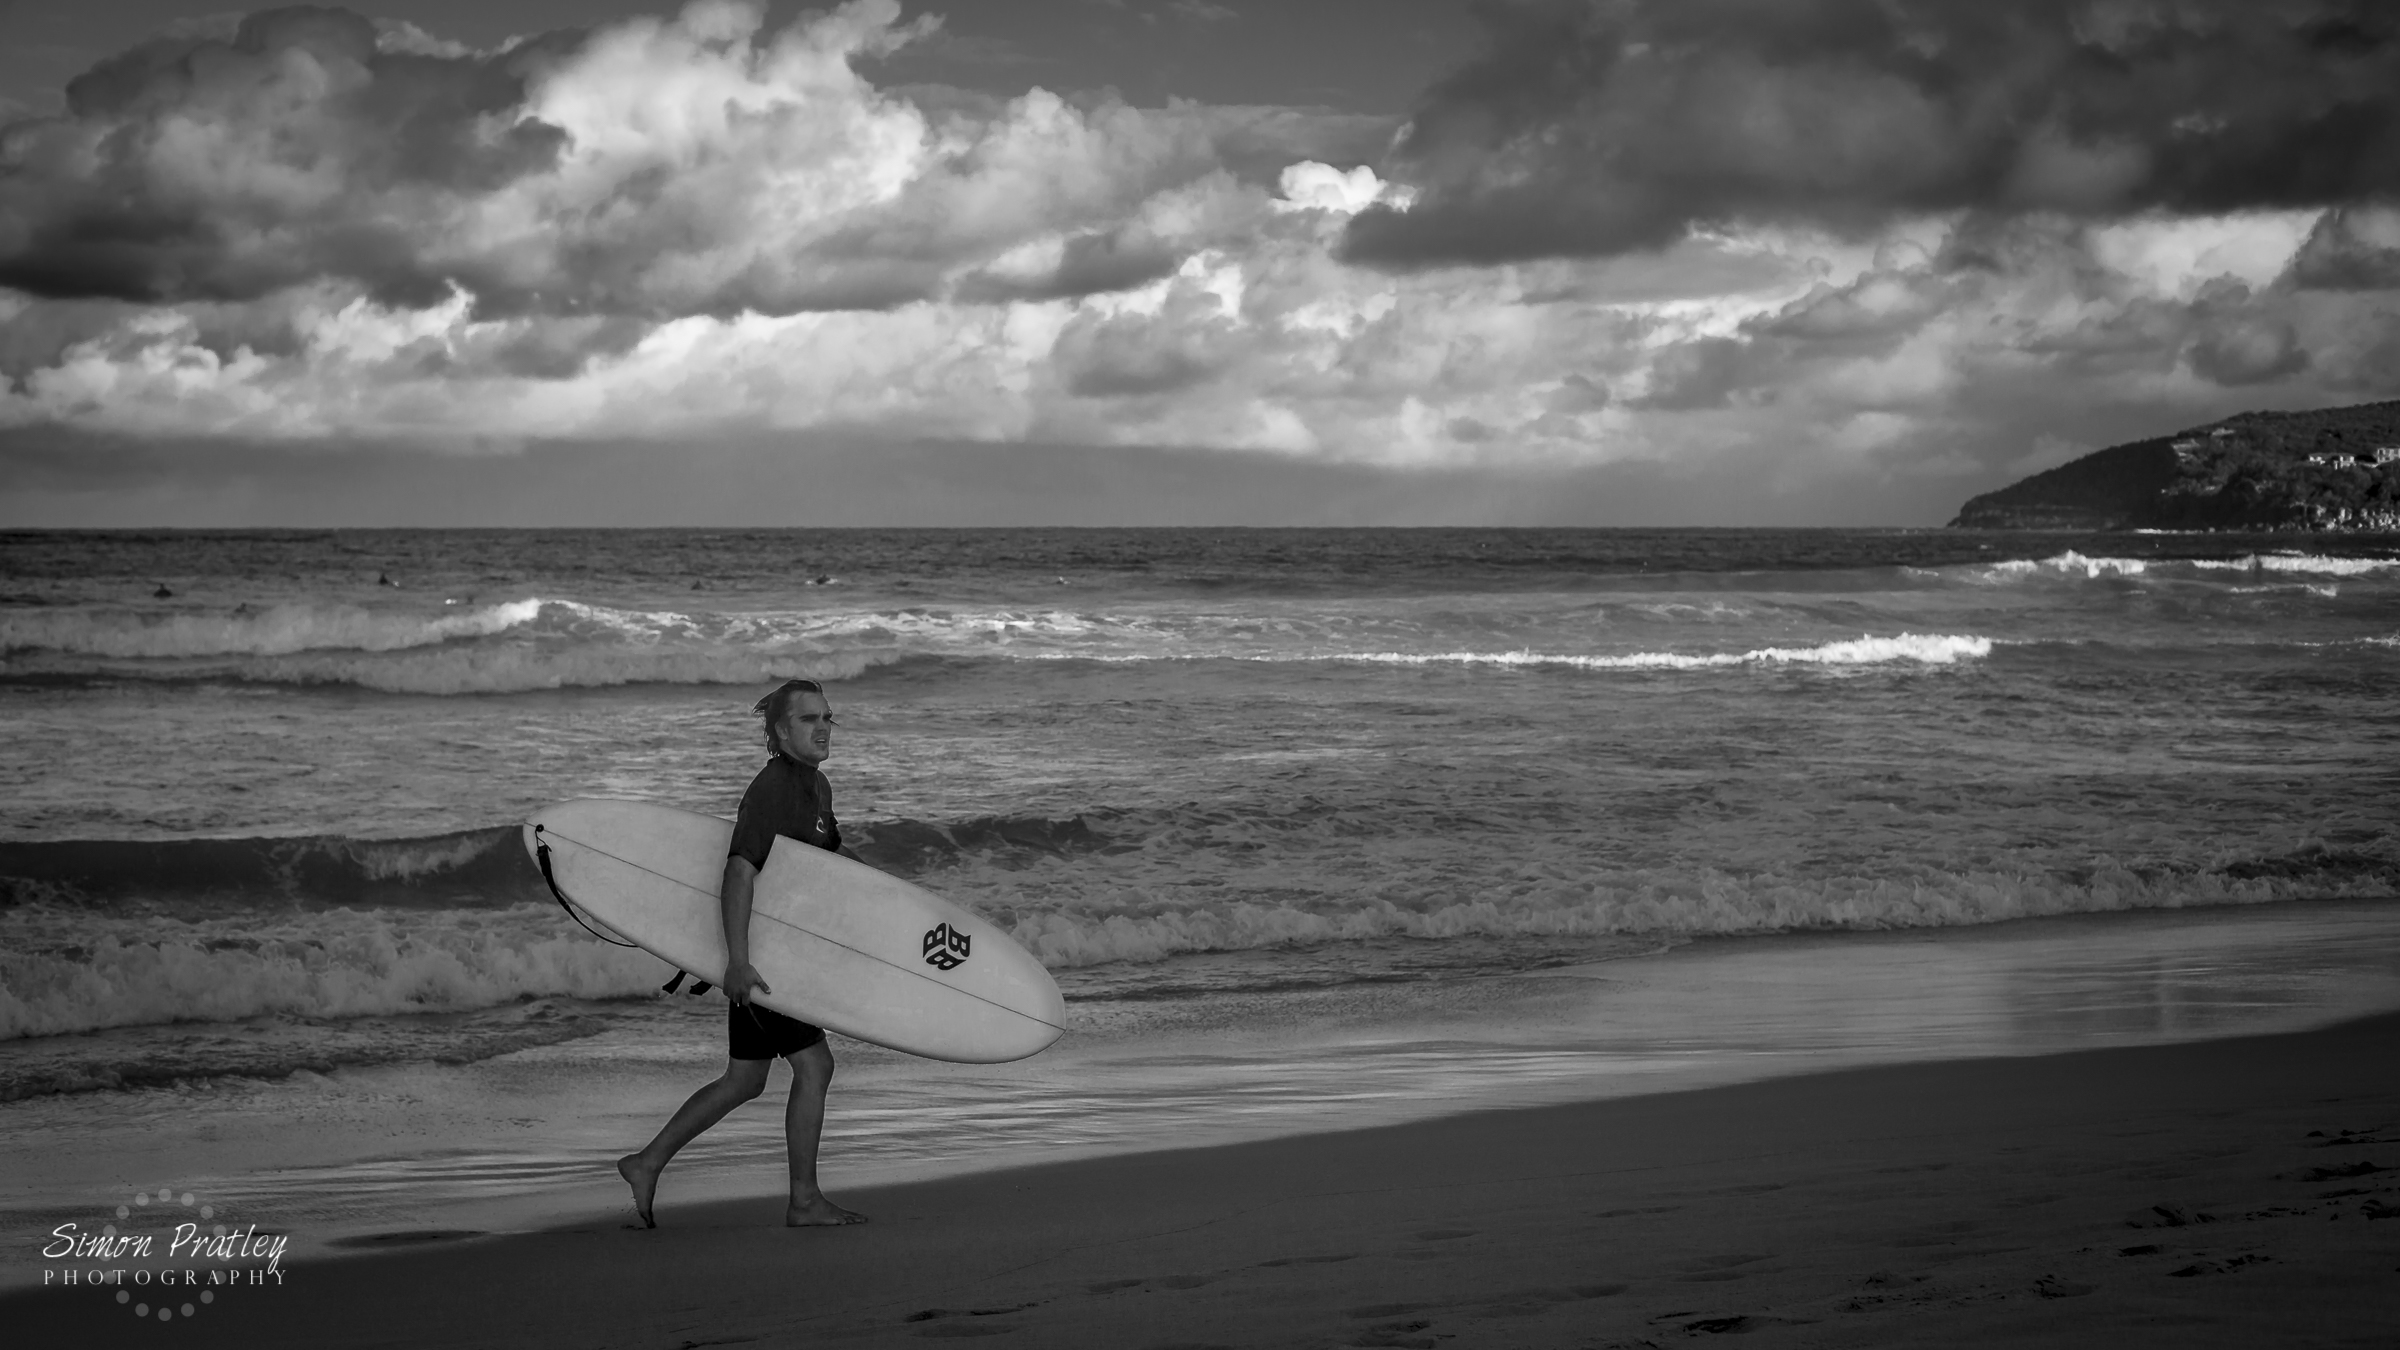 Surfer with Board